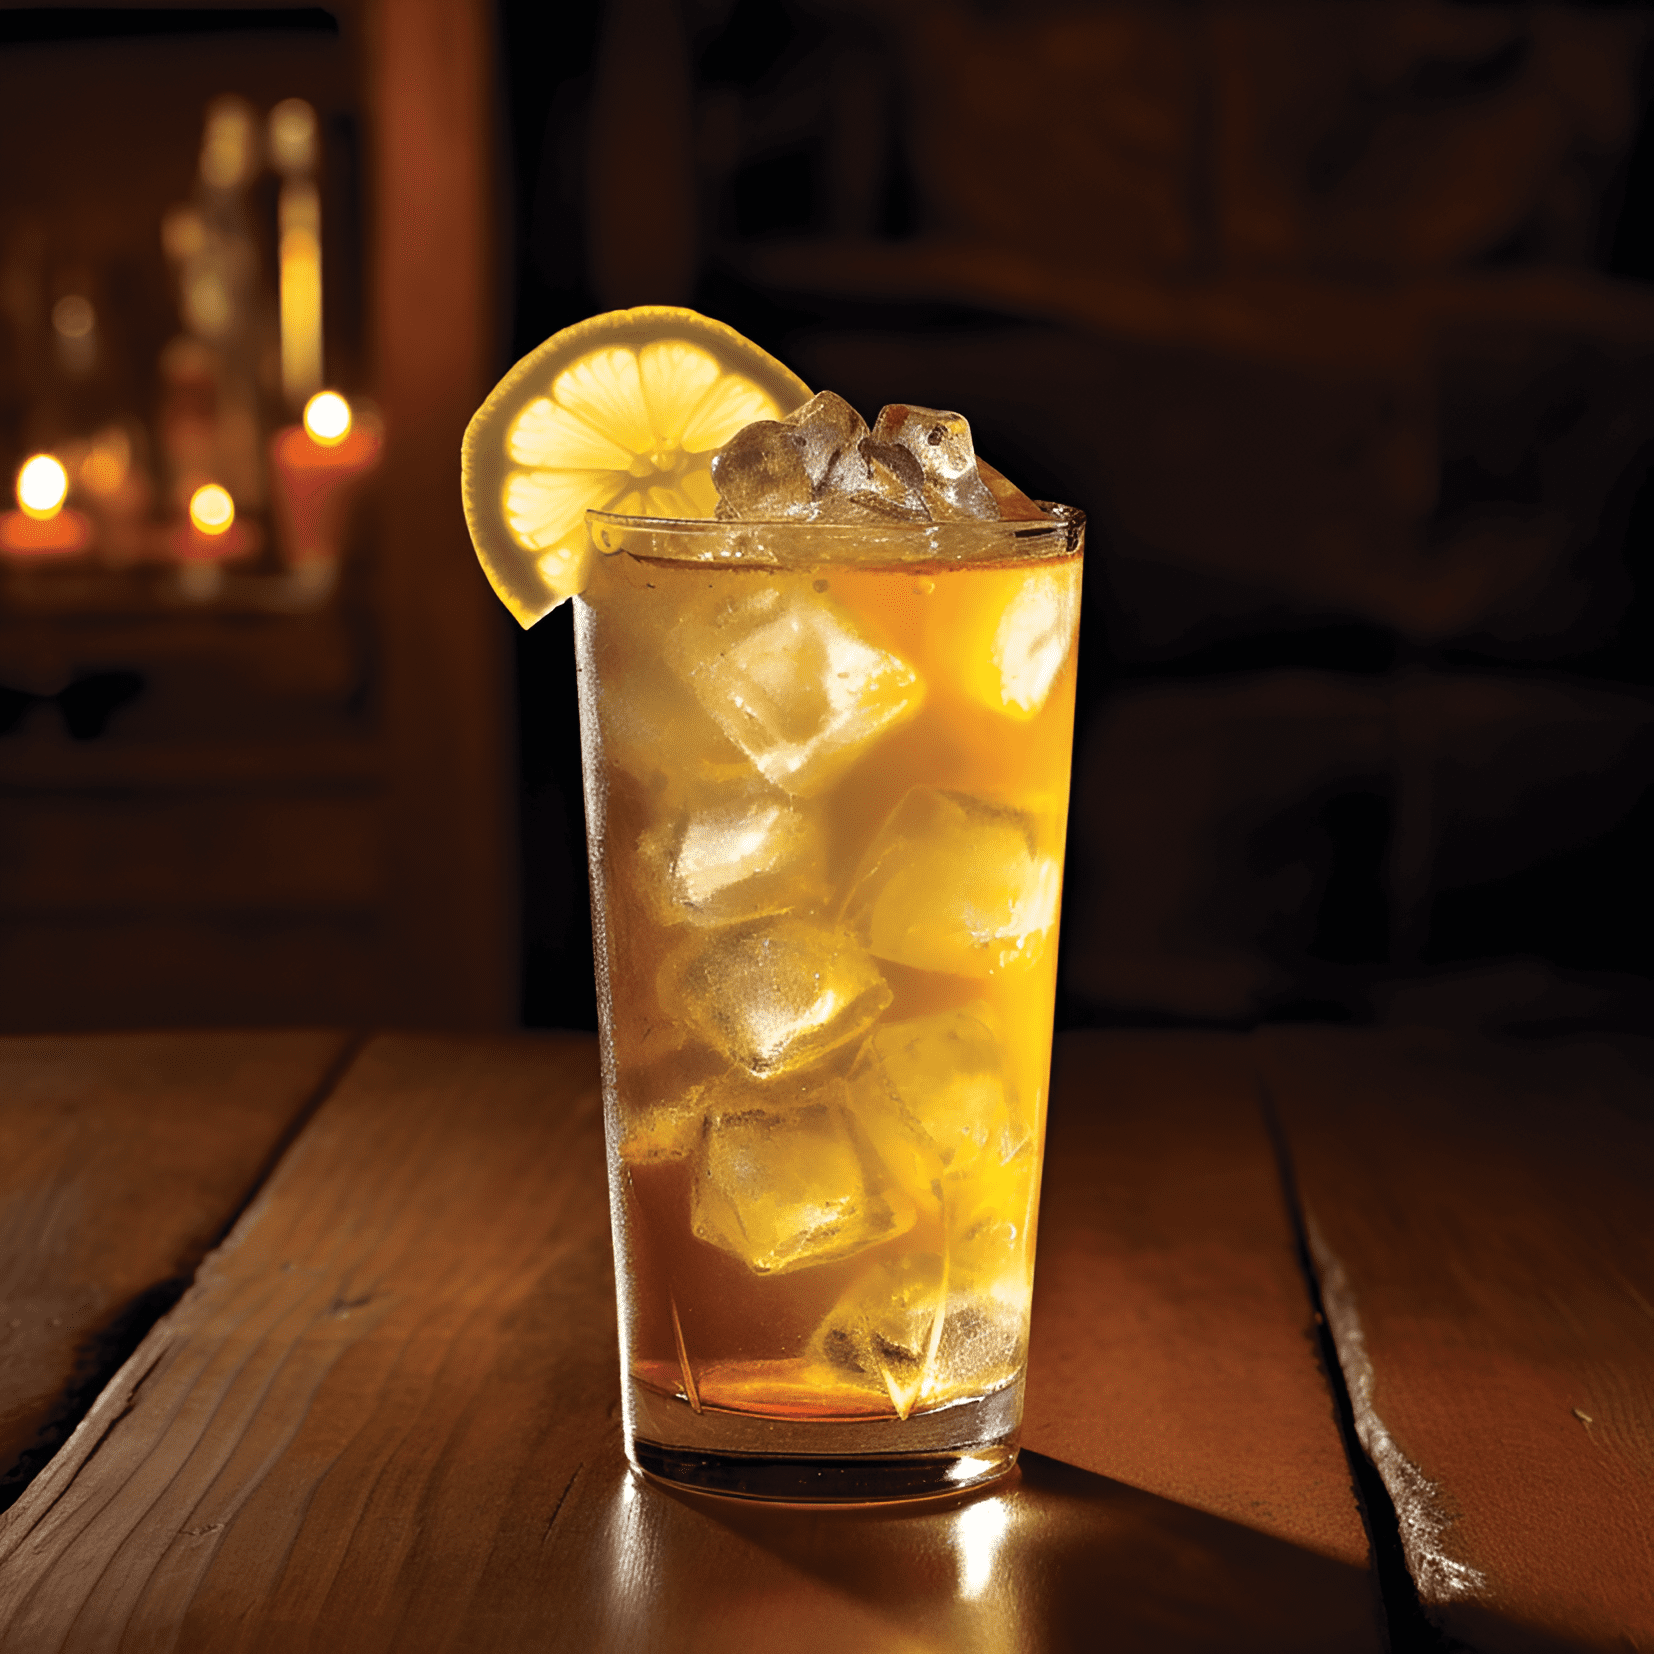 Stone Fence Cocktail Recipe - The Stone Fence has a refreshing, crisp taste with a balance of sweet and tart flavors. The hard cider provides a fruity, slightly sour base, while the rum adds warmth and depth. The result is a well-rounded, easy-drinking cocktail that is perfect for any occasion.